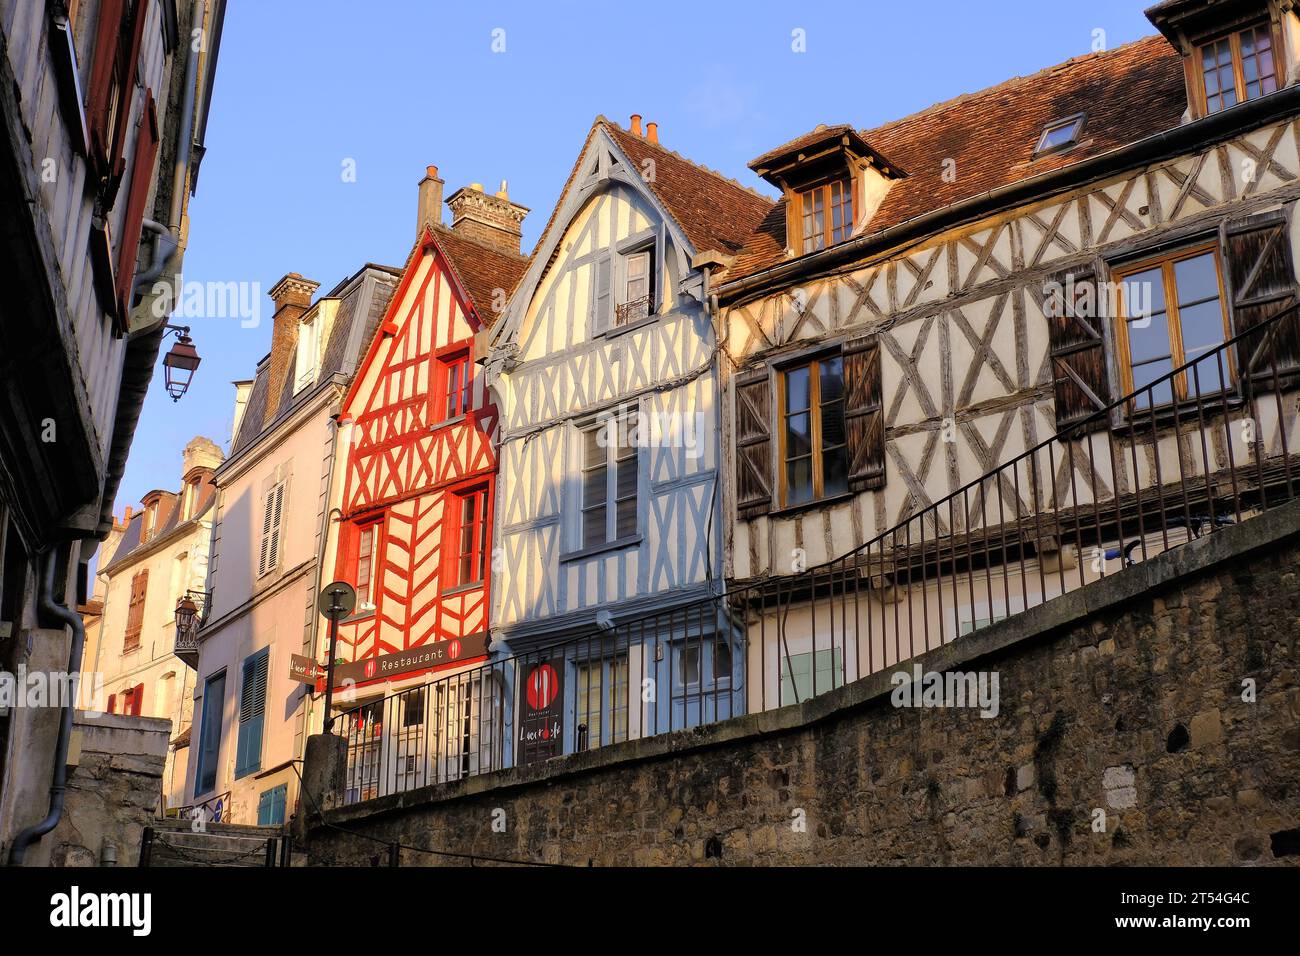 Auxerre: Colourful half timbered buildings in Rue du Dr Labosse and Rue de l’Yonne soon after sunrise in Auxerre, Burgundy, France Stock Photo